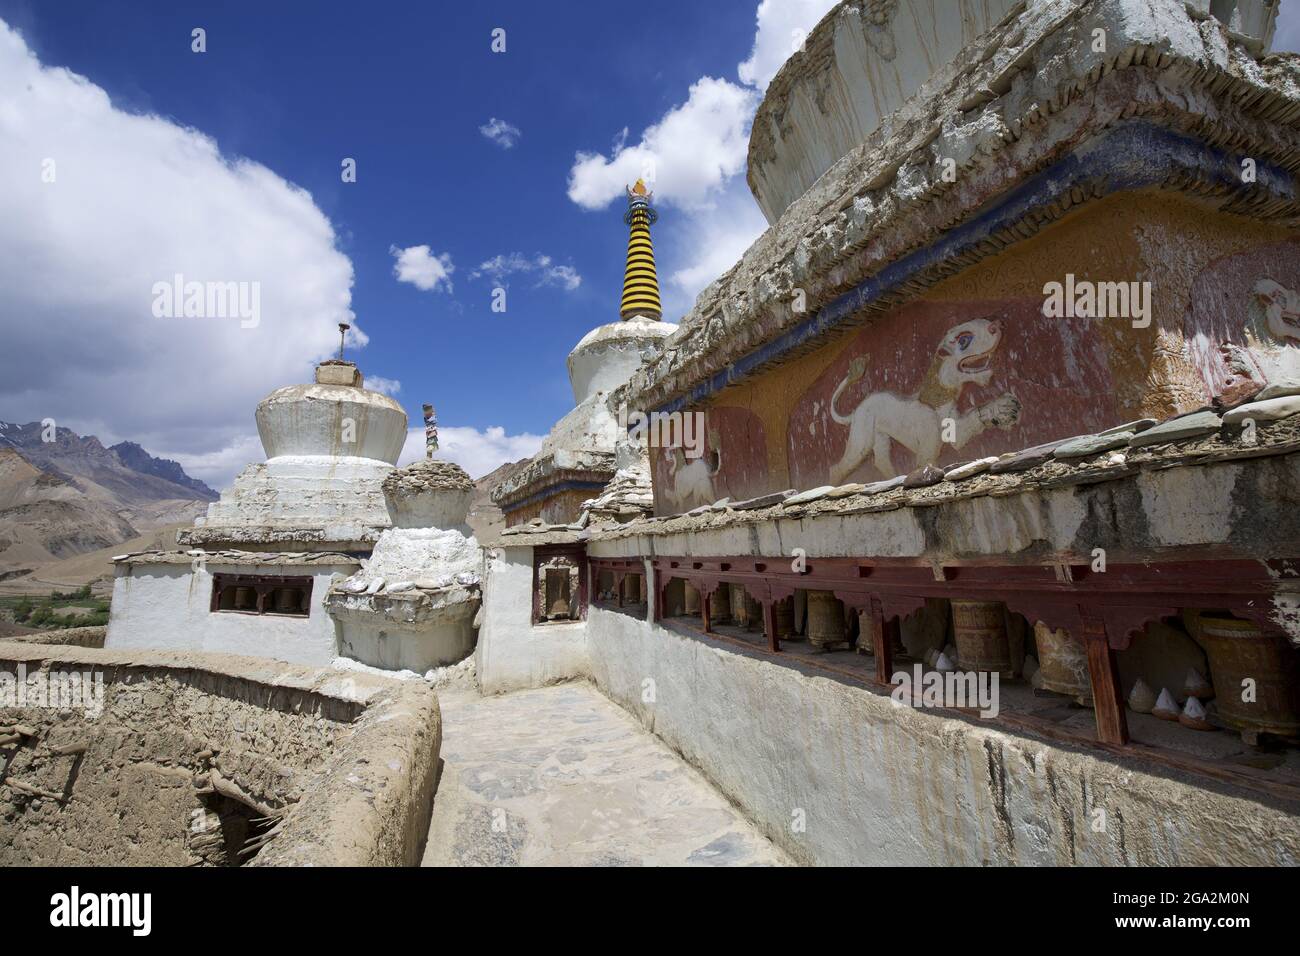 Close-up of concrete walkway through the whitewashed Buddhist stupas (known as chortens in Tibetan Culture) and prayer wheels at the Lamayuru Monas... Stock Photo